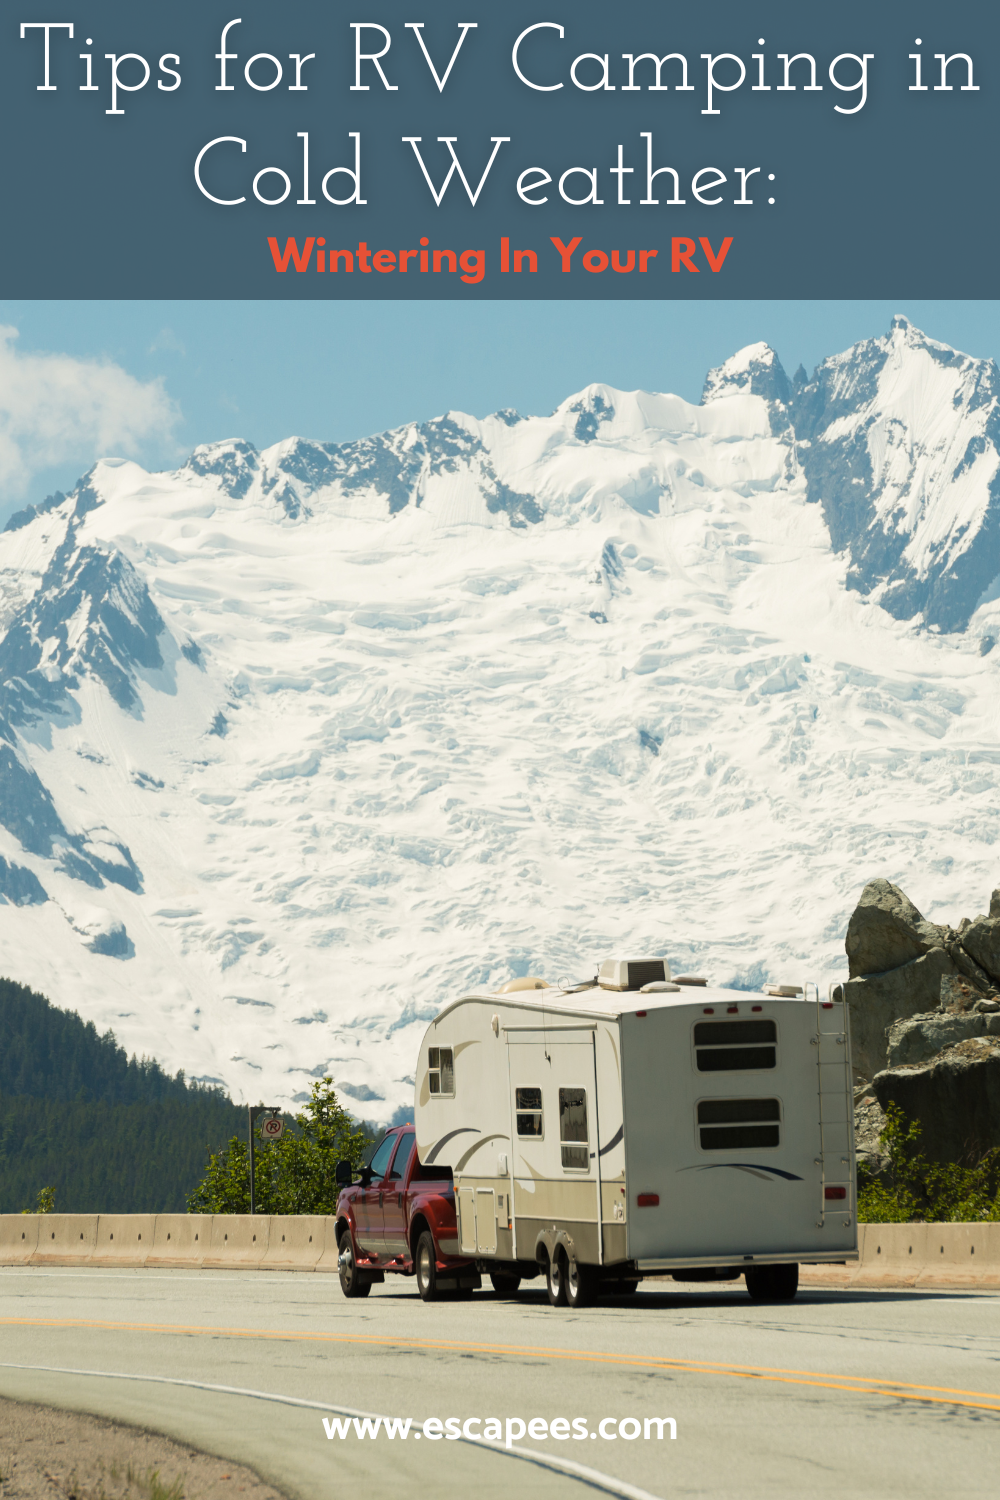 Tips for RV Camping in Cold Weather: Wintering in Your RV 11